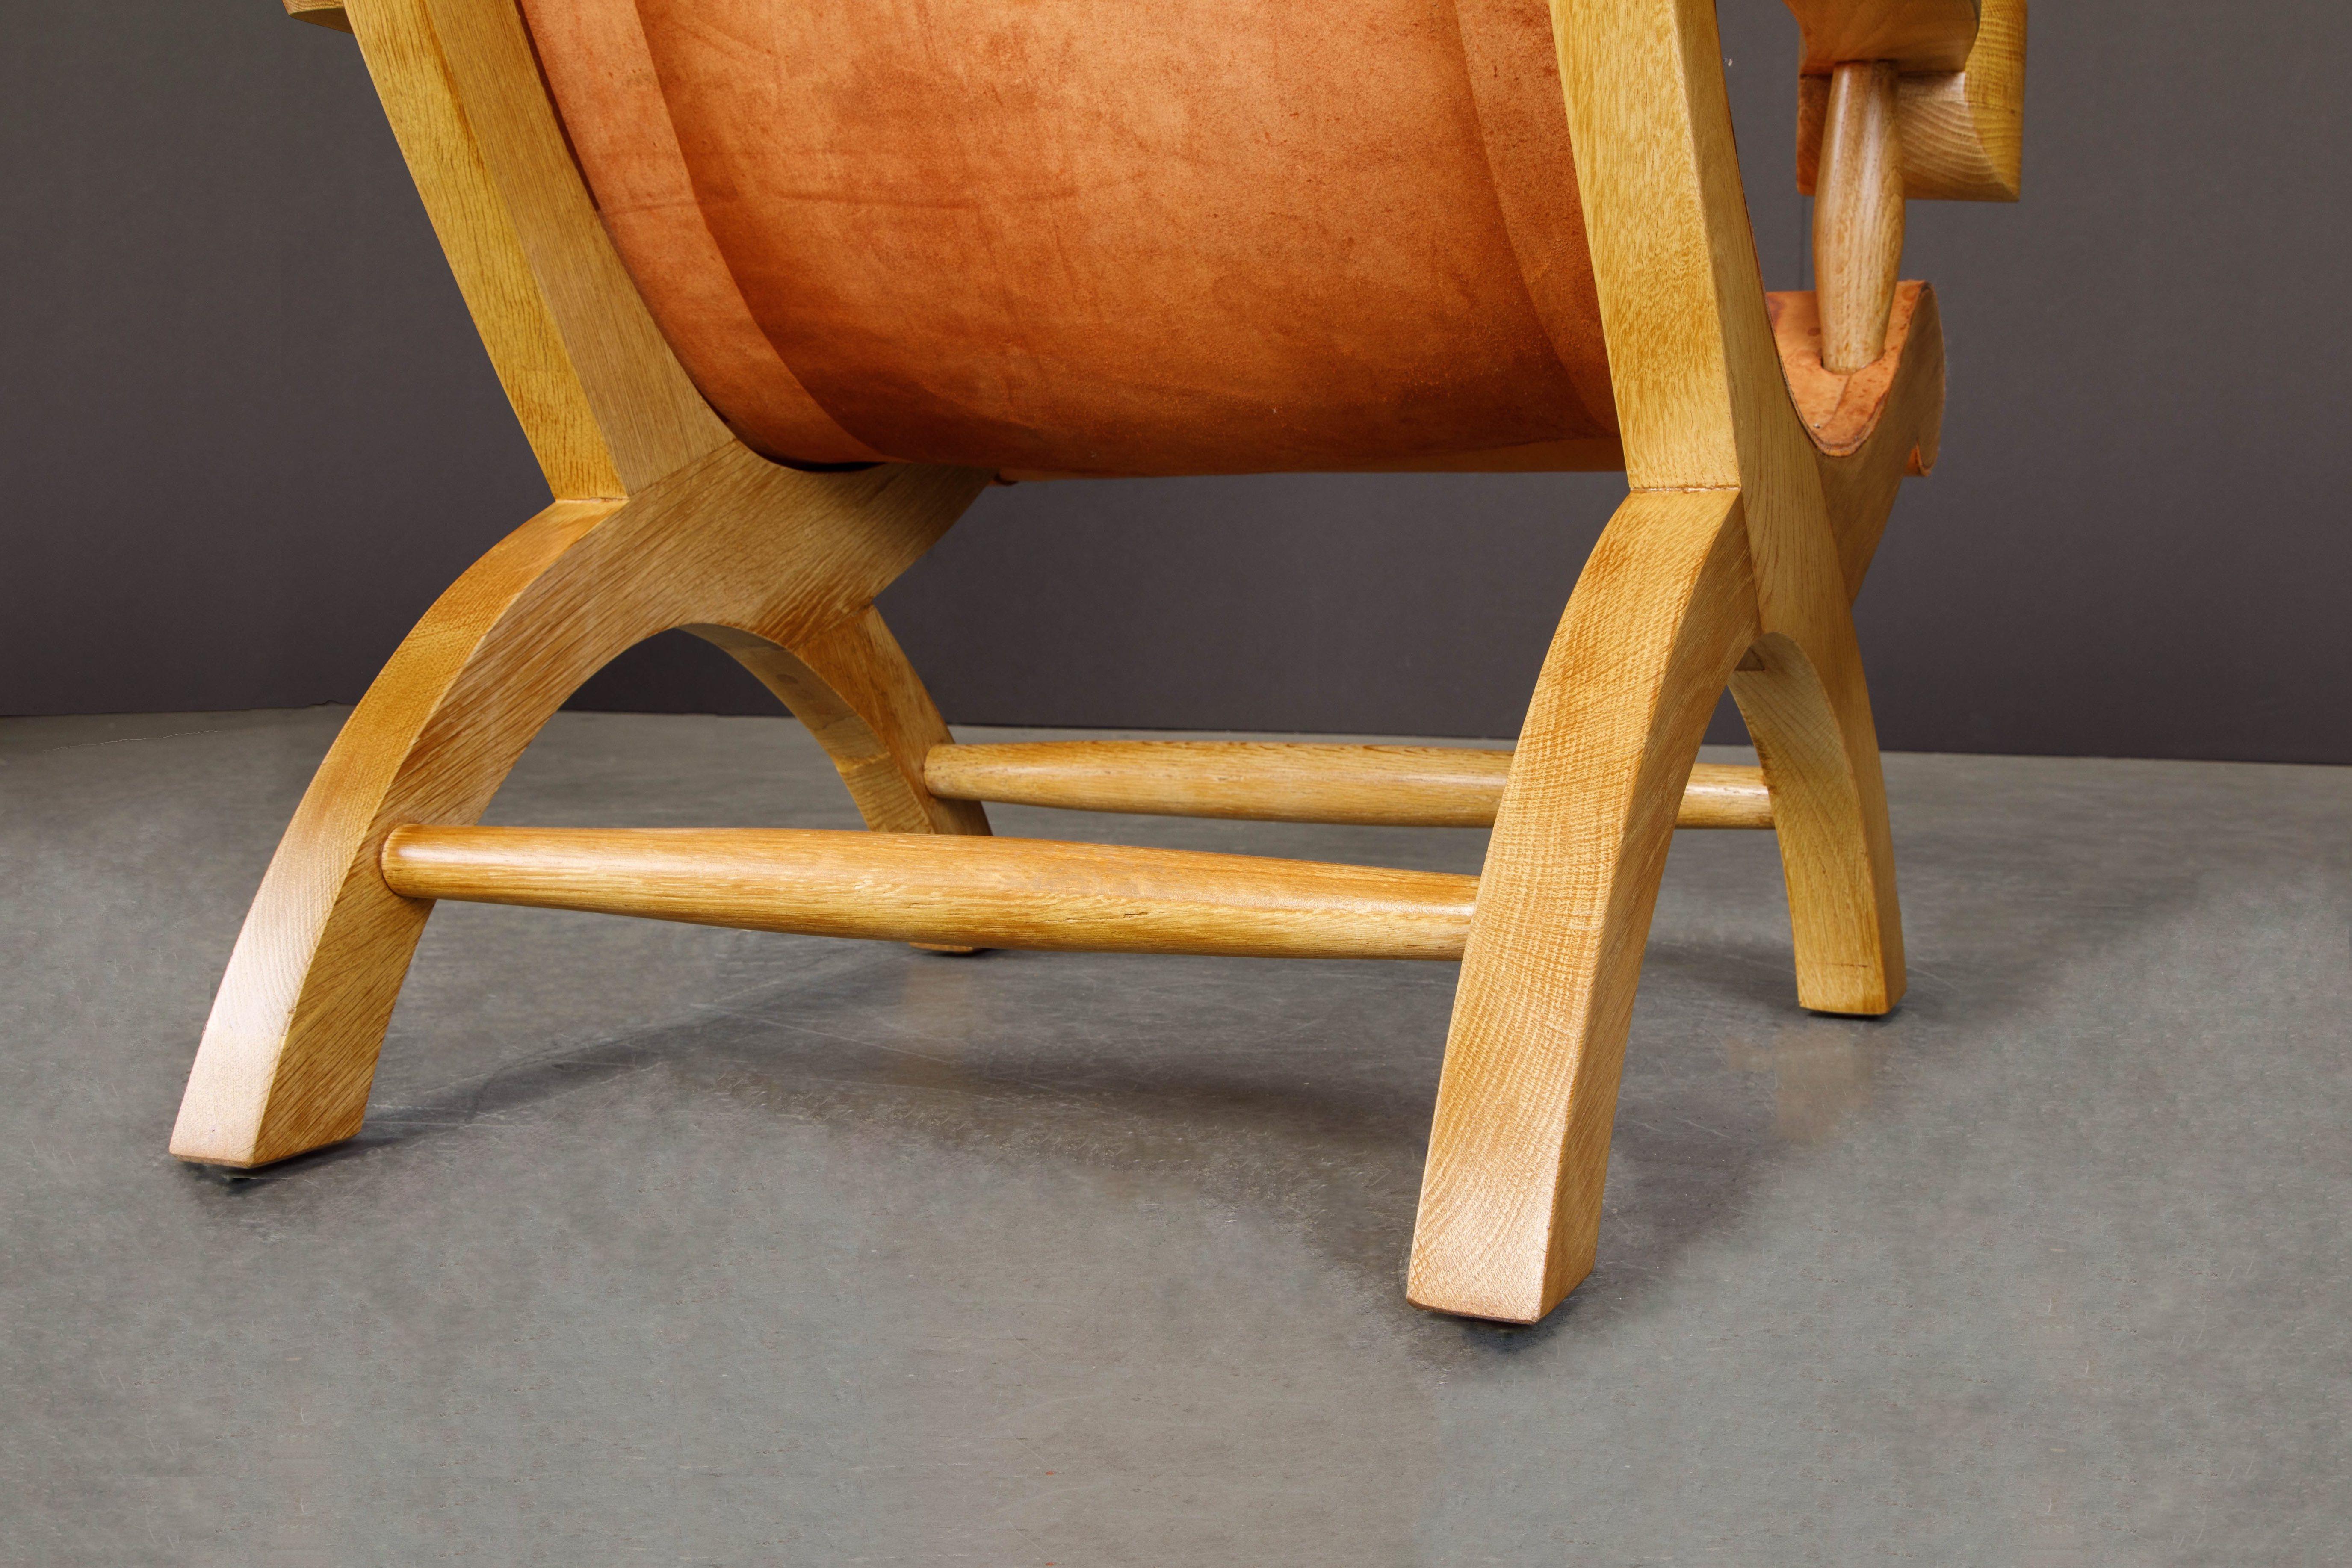 Clara Porset Patinated Leather and Cypress 'Butaque' Armchair, Mexico, c. 1947  2